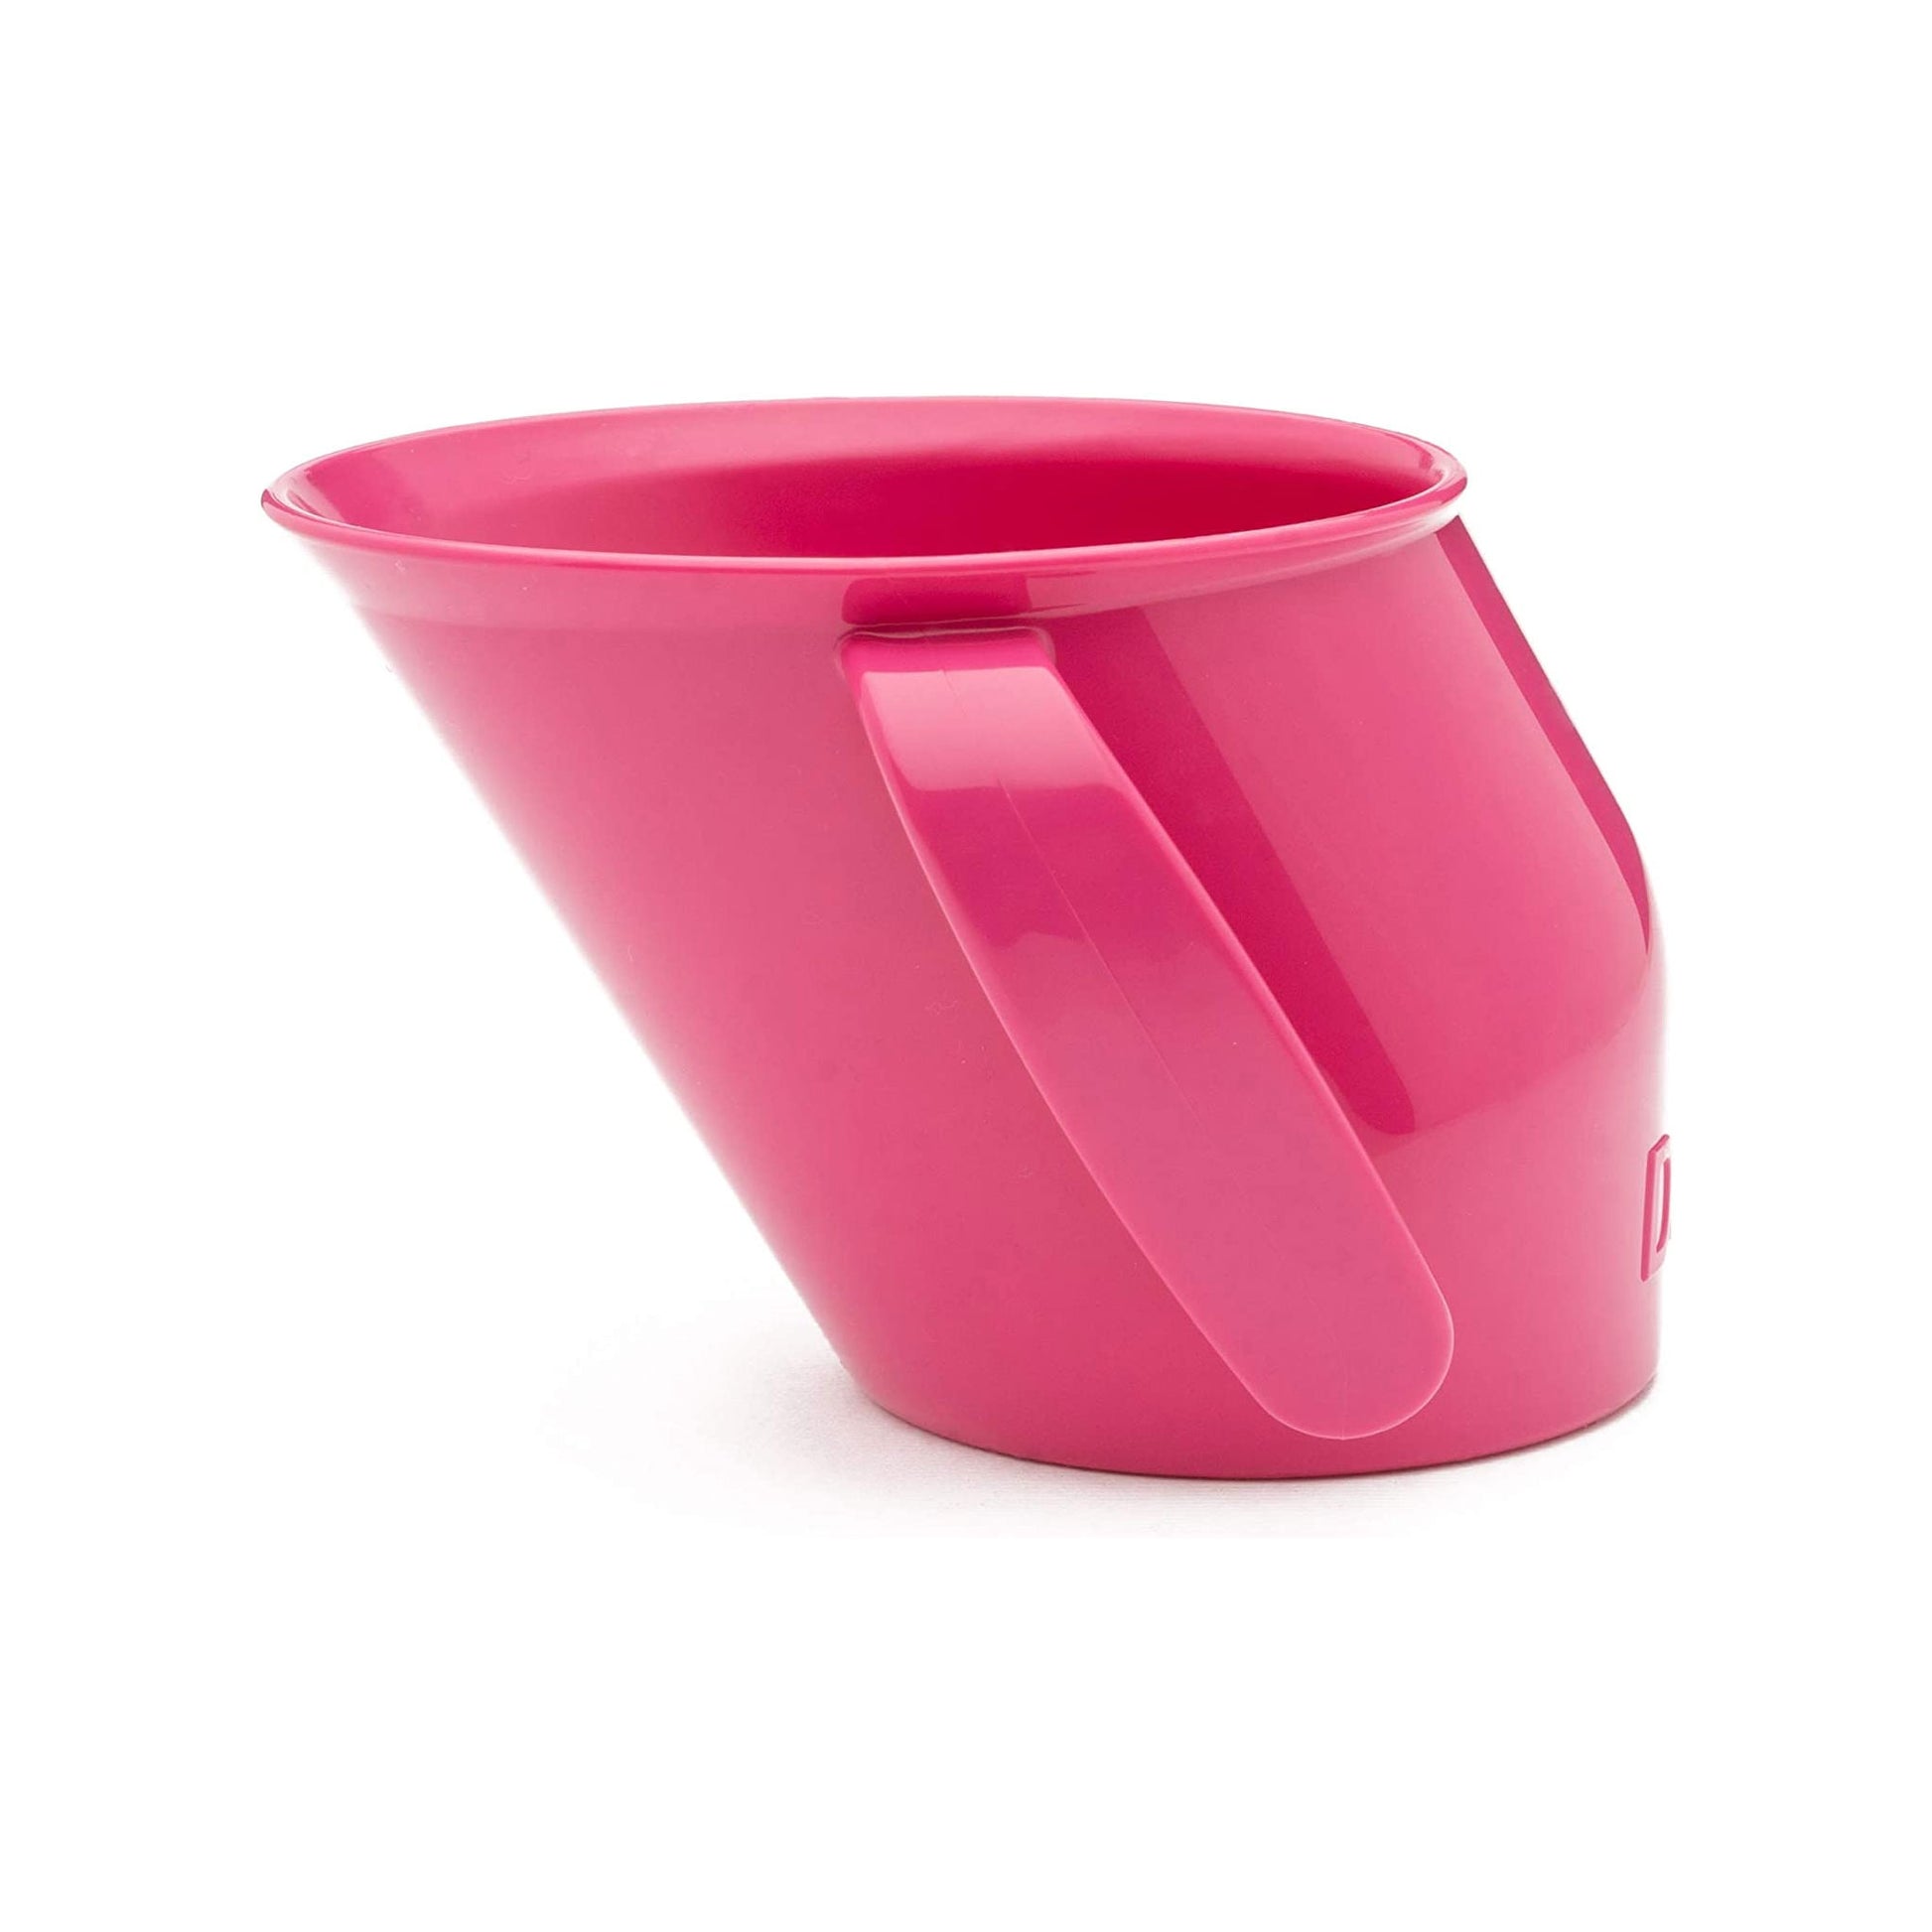 THE DOIDY CUP is the uniquely slanted open cup training to help infants during weaning.